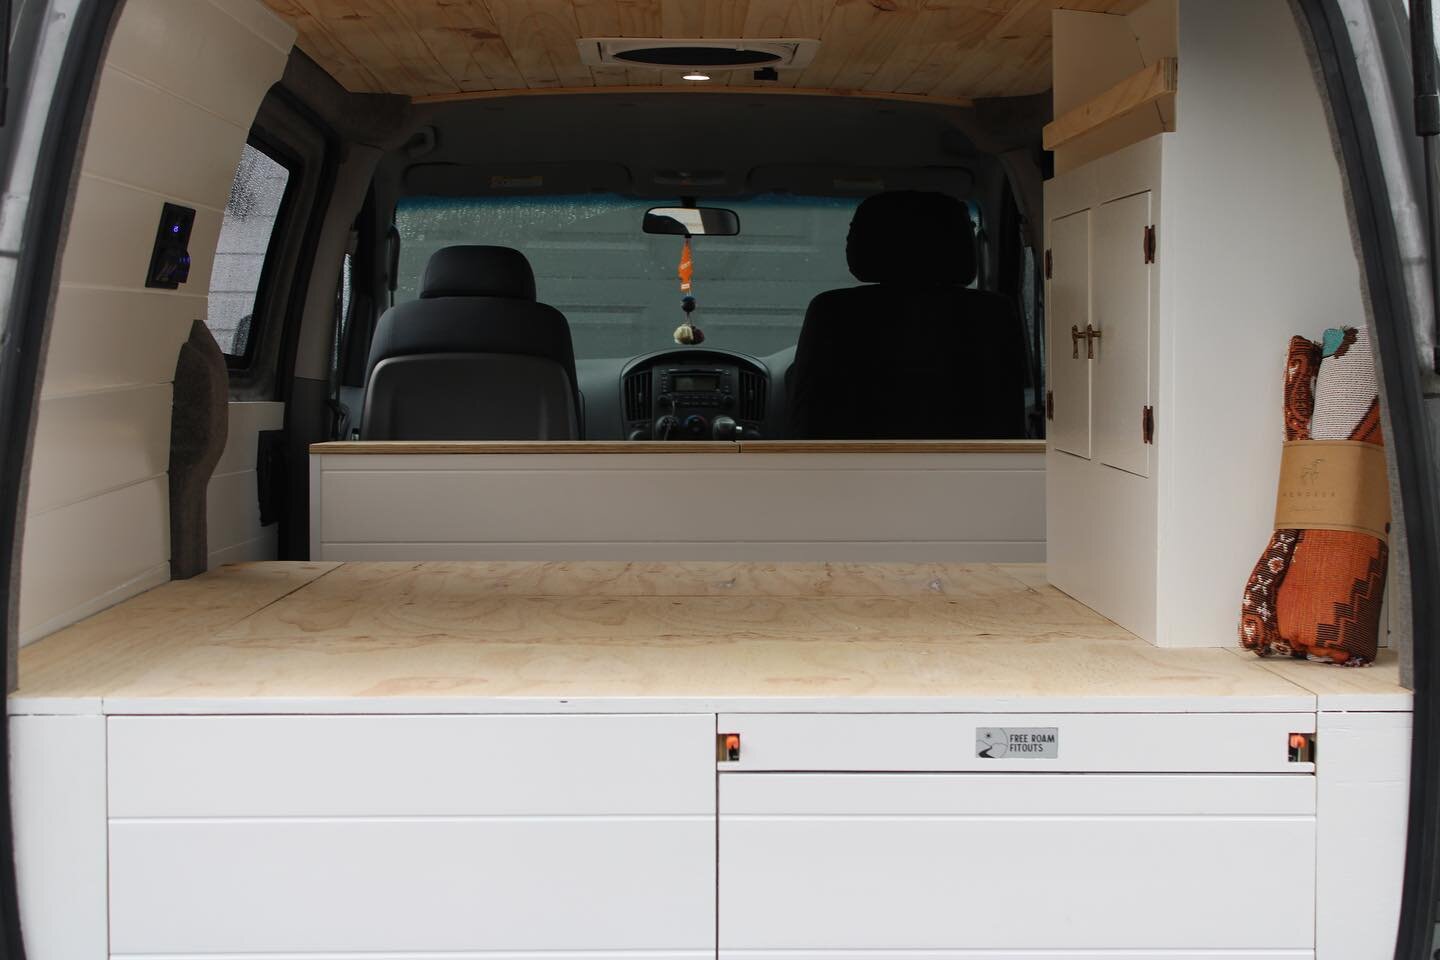 Introducing another epic ILoad build 🚐 
We love the look of the raw pine on the ceiling and the white lining board walls in this one 👌🏽 set up for complete off grid camping thanks to @q__solar , super functional layout  with a camp kitchen and our